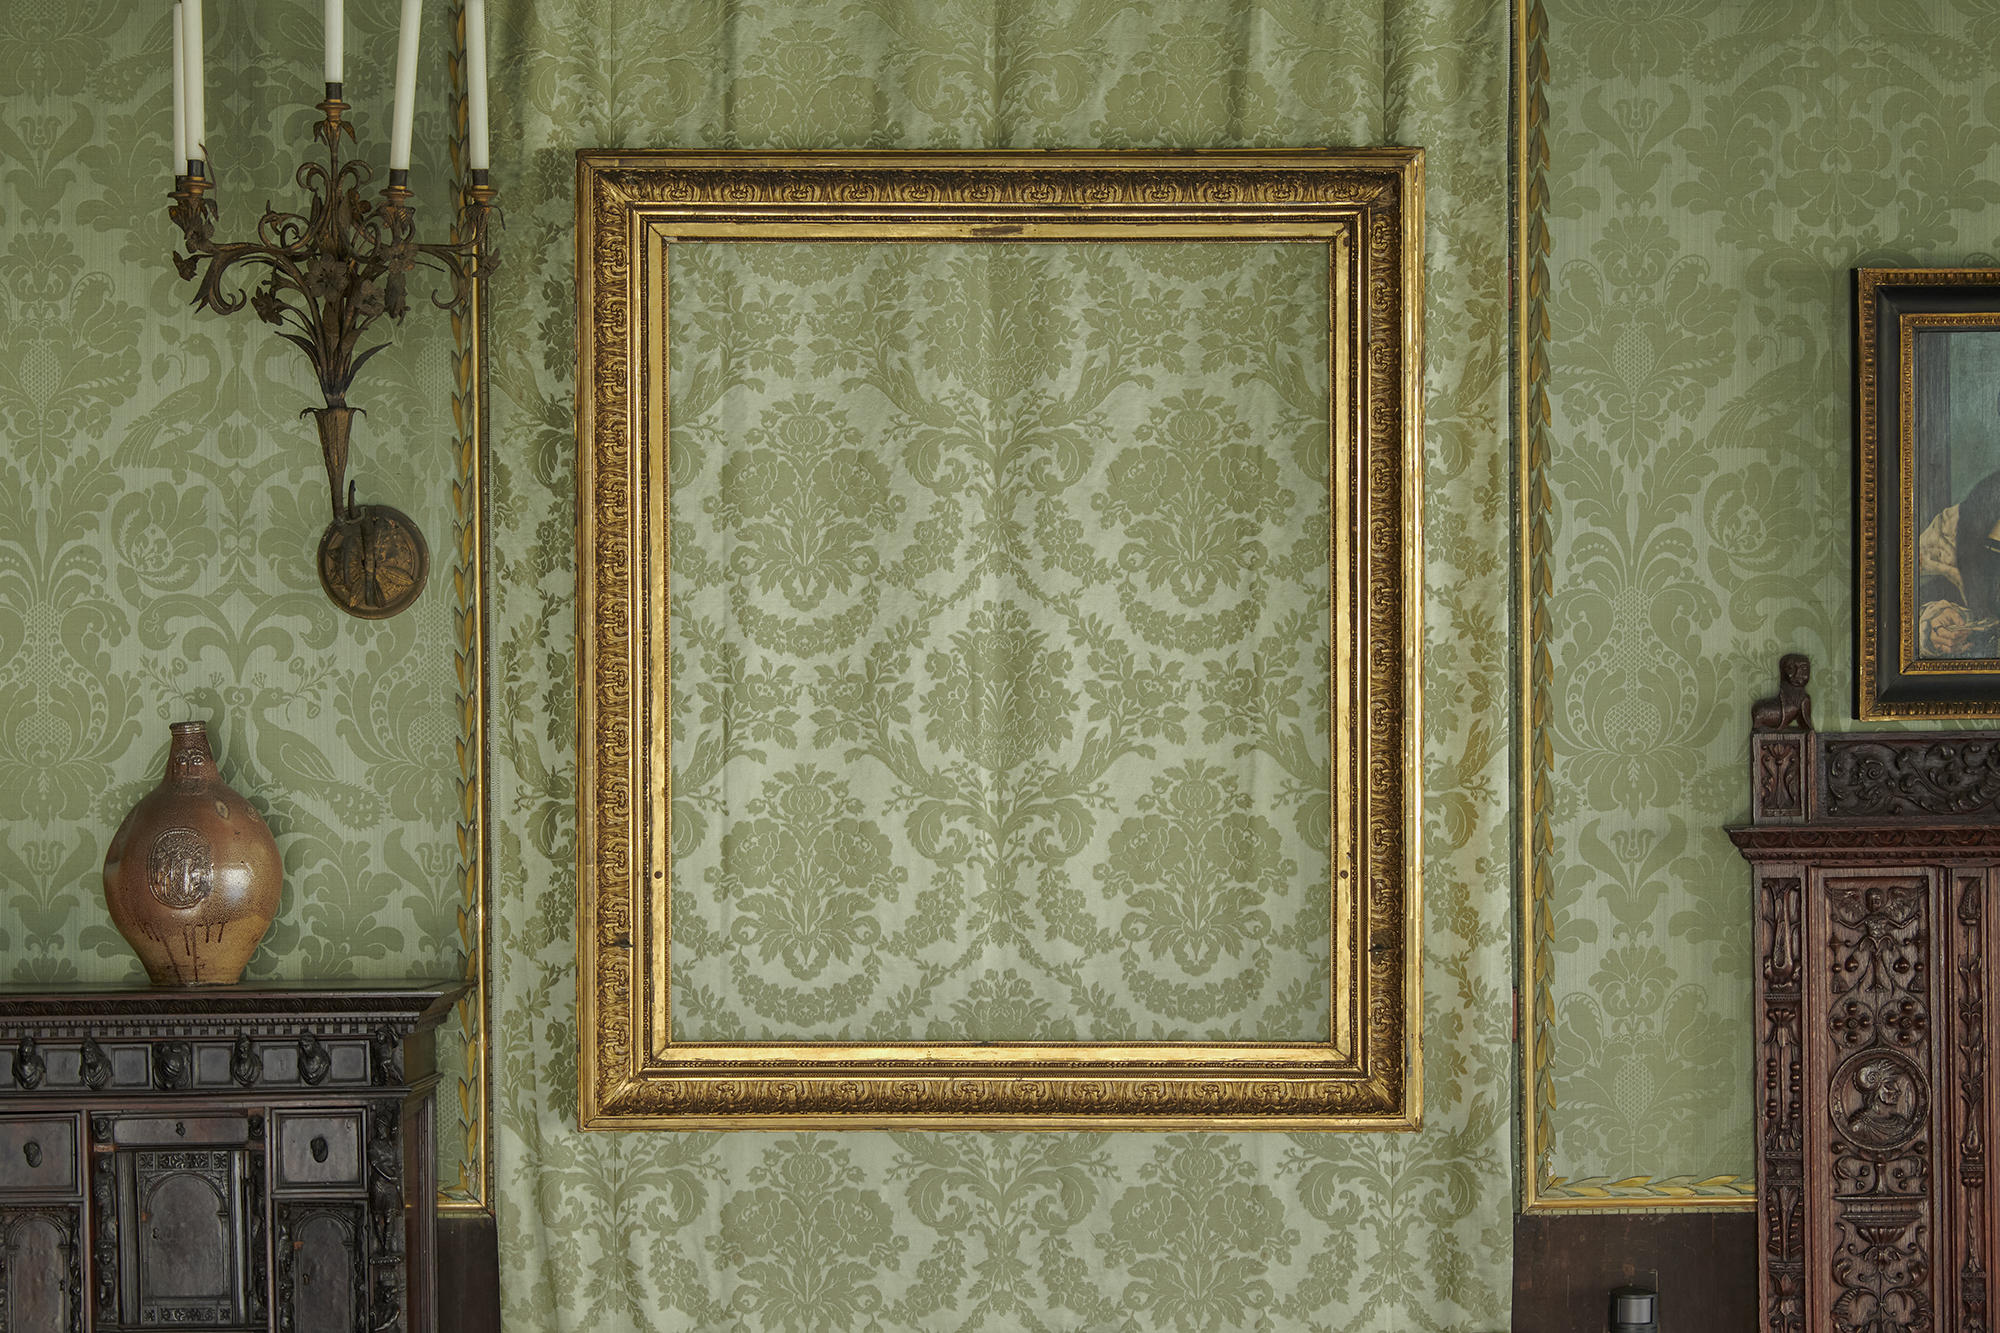 An empty gold frame in the Dutch room.